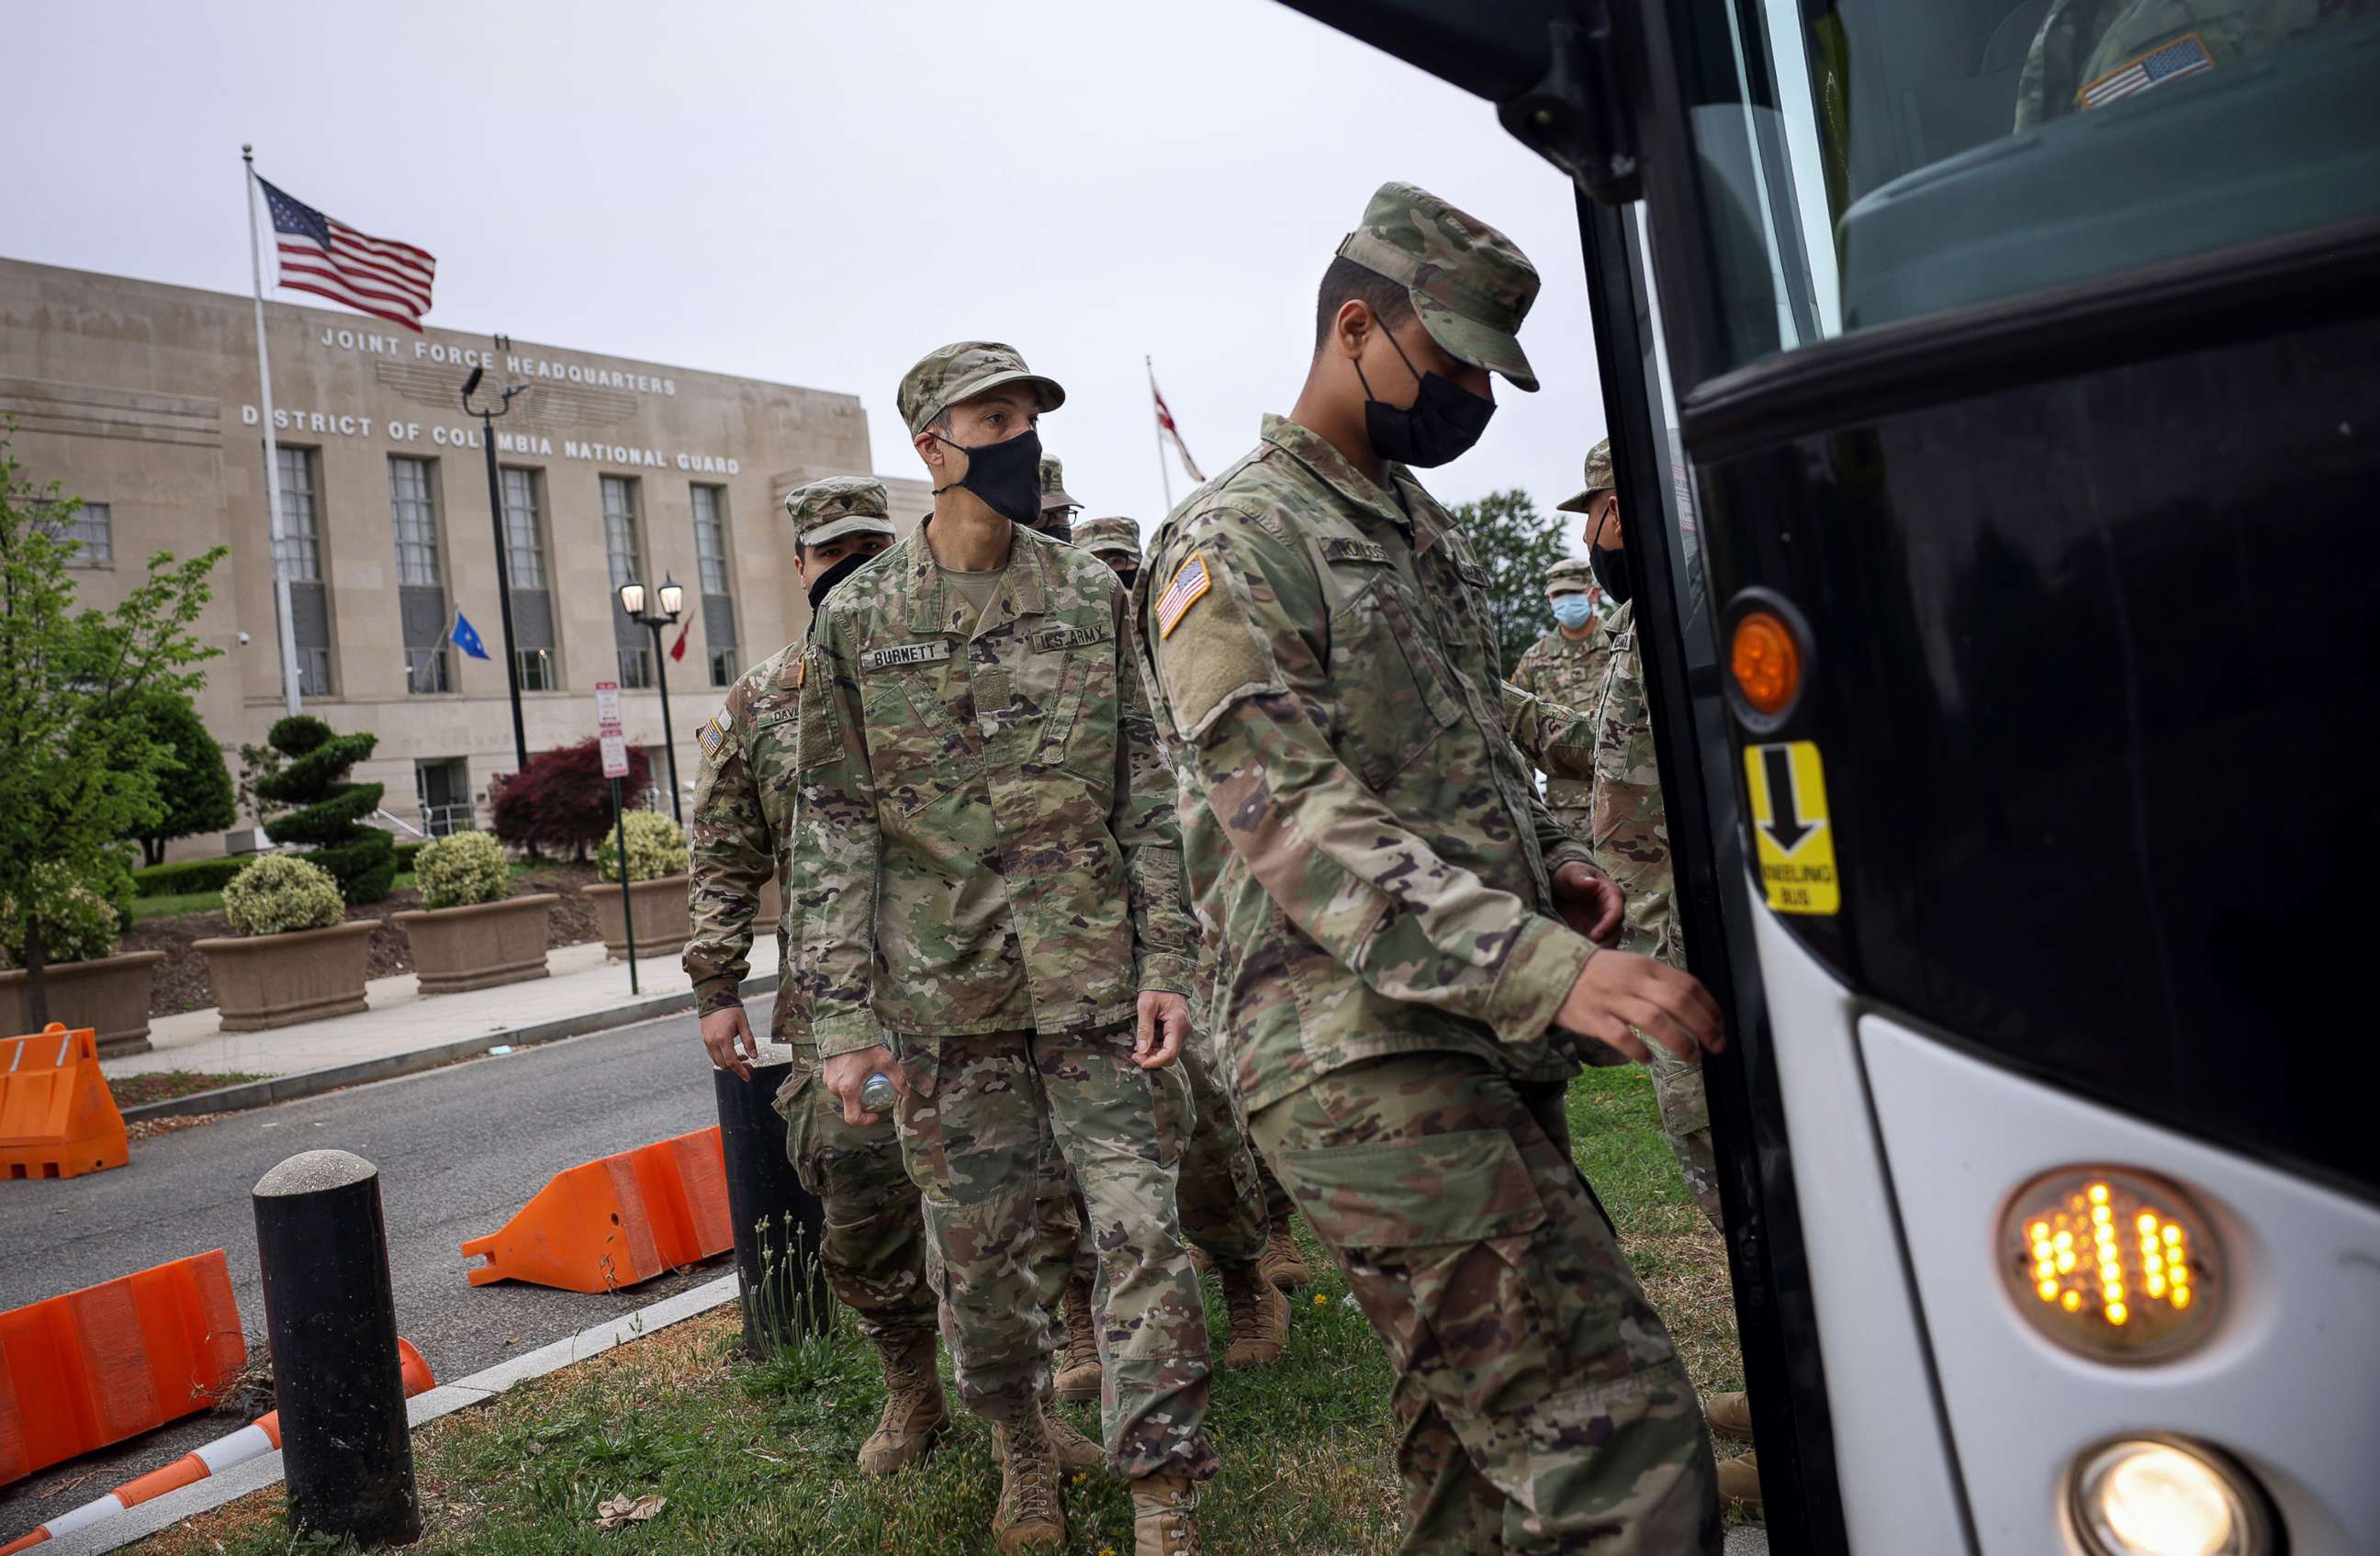 PHOTO: National Guard troops board buses as they leave the Armory after ending their mission of providing security to the U.S. Capitol, May 24, 2021, in Washington, DC.